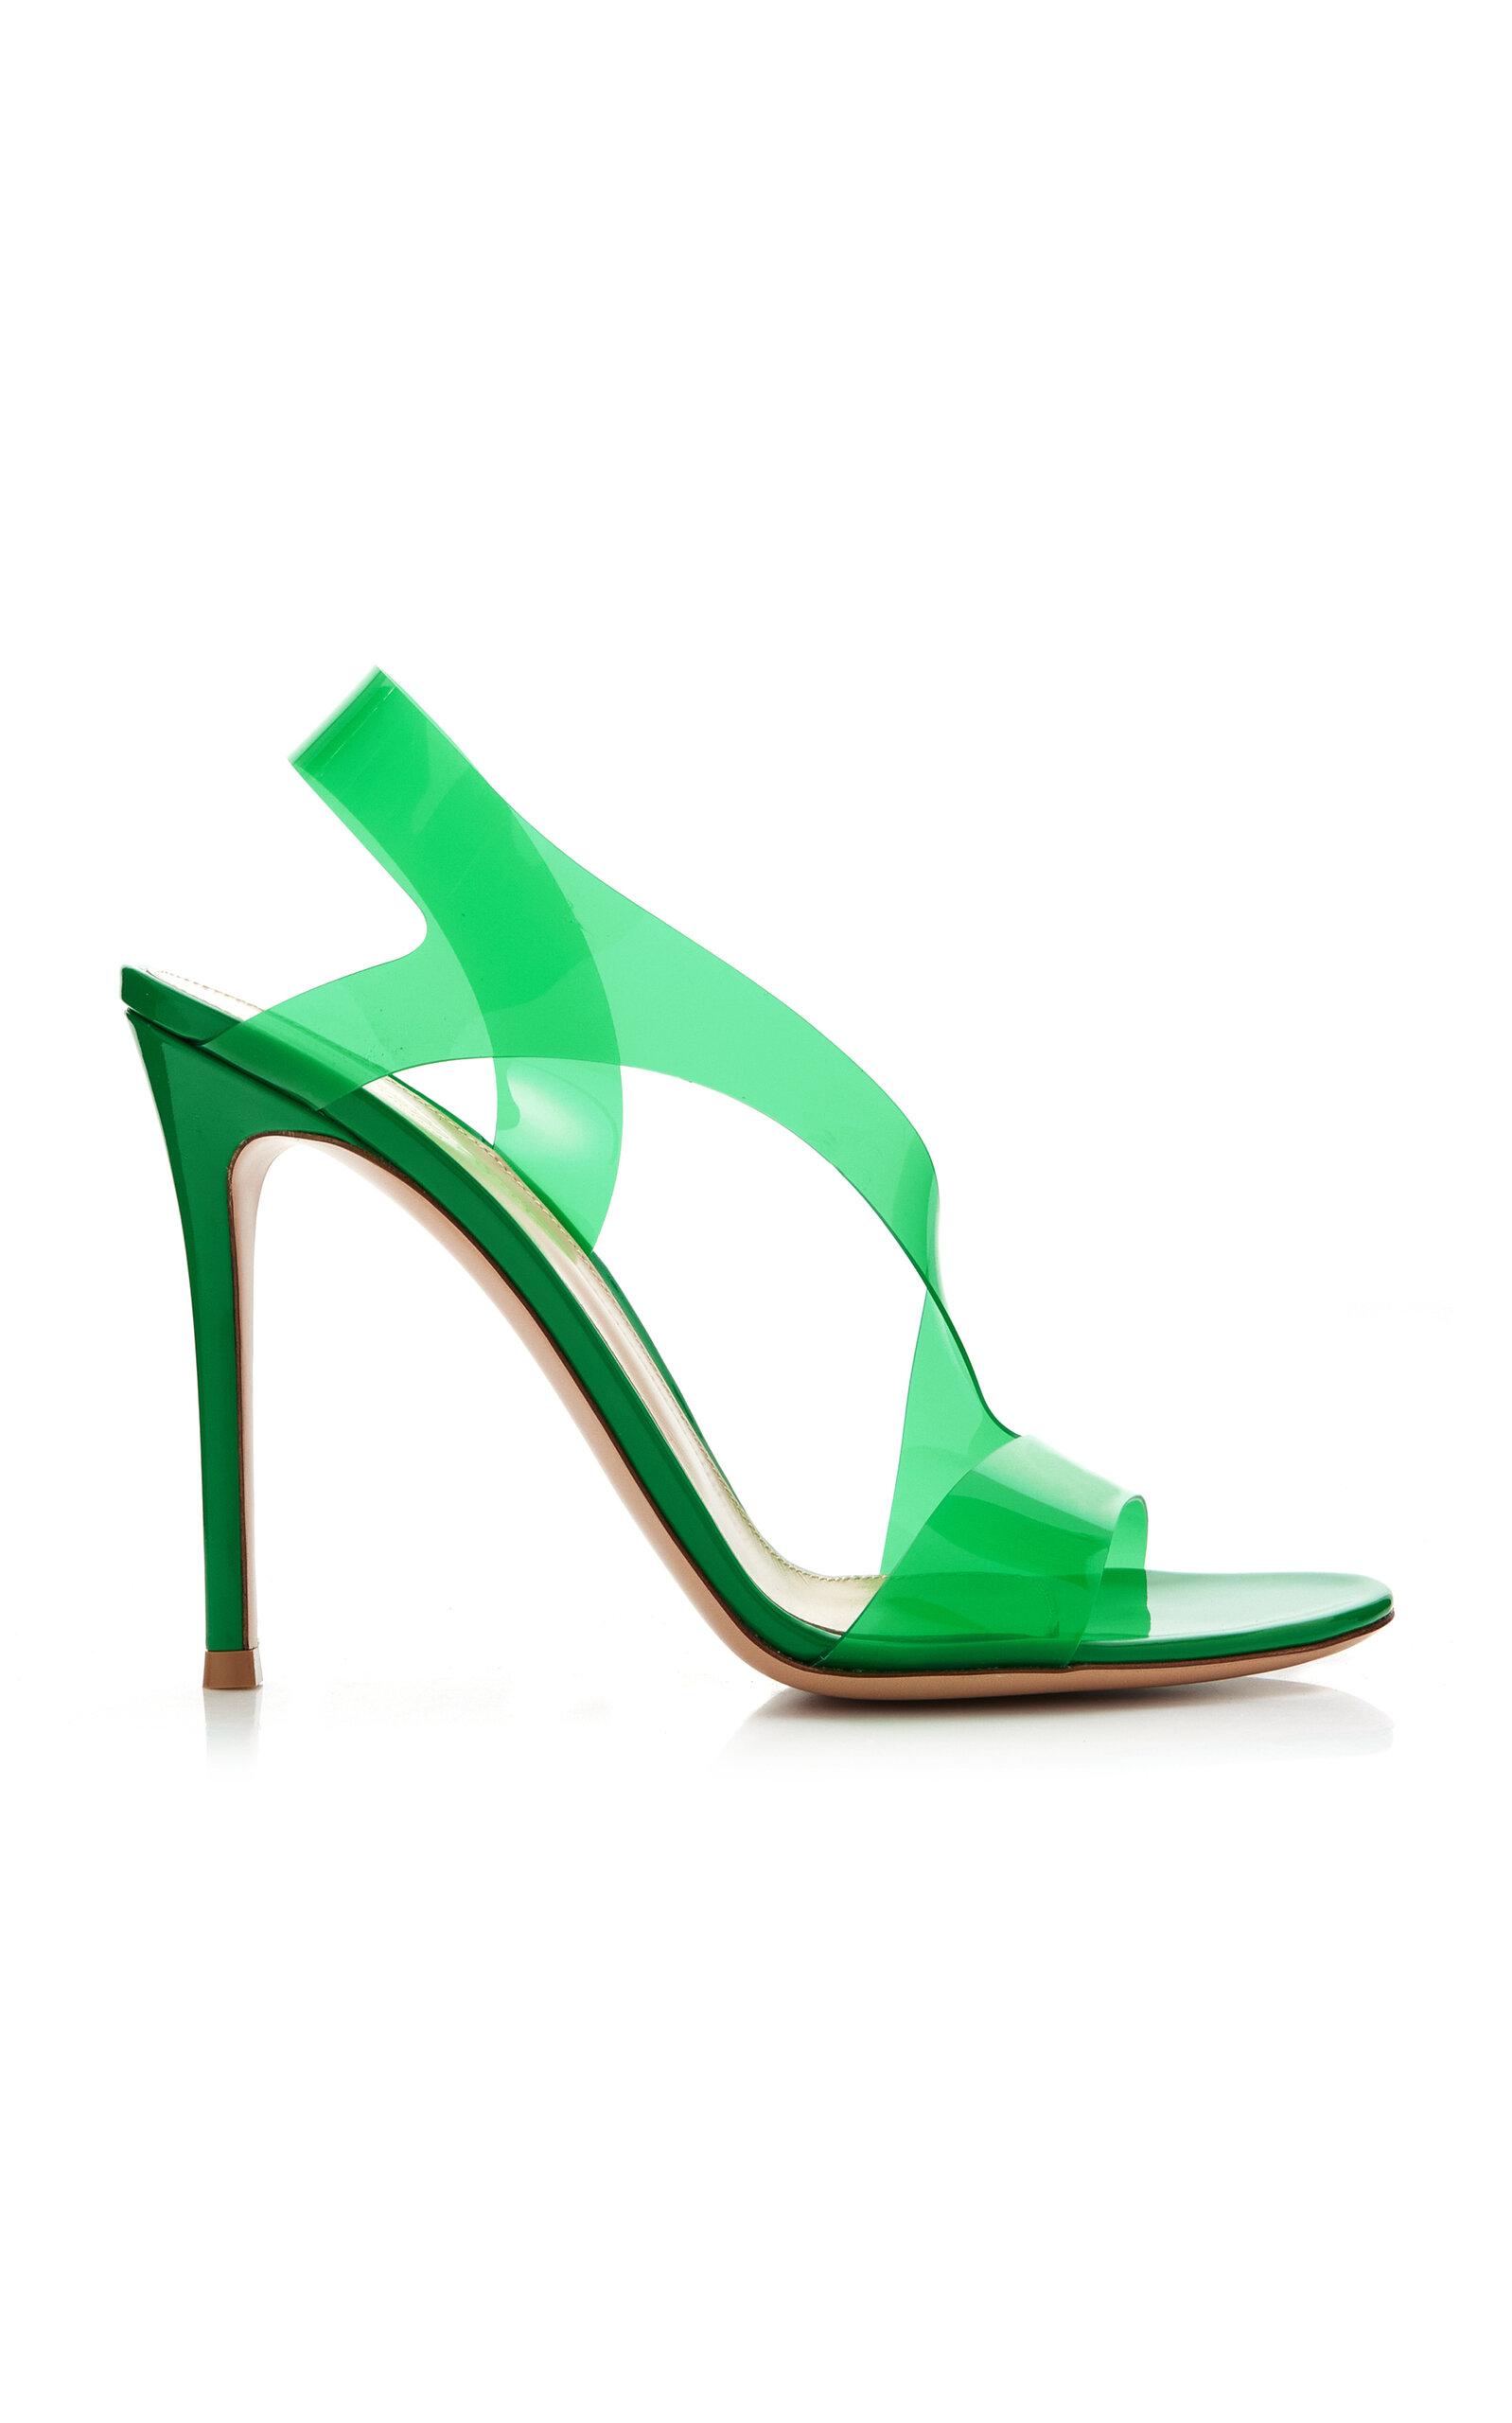 Gianvito Rossi Exclusive Metropolis Pvc, Leather Sandals in Green | Lyst